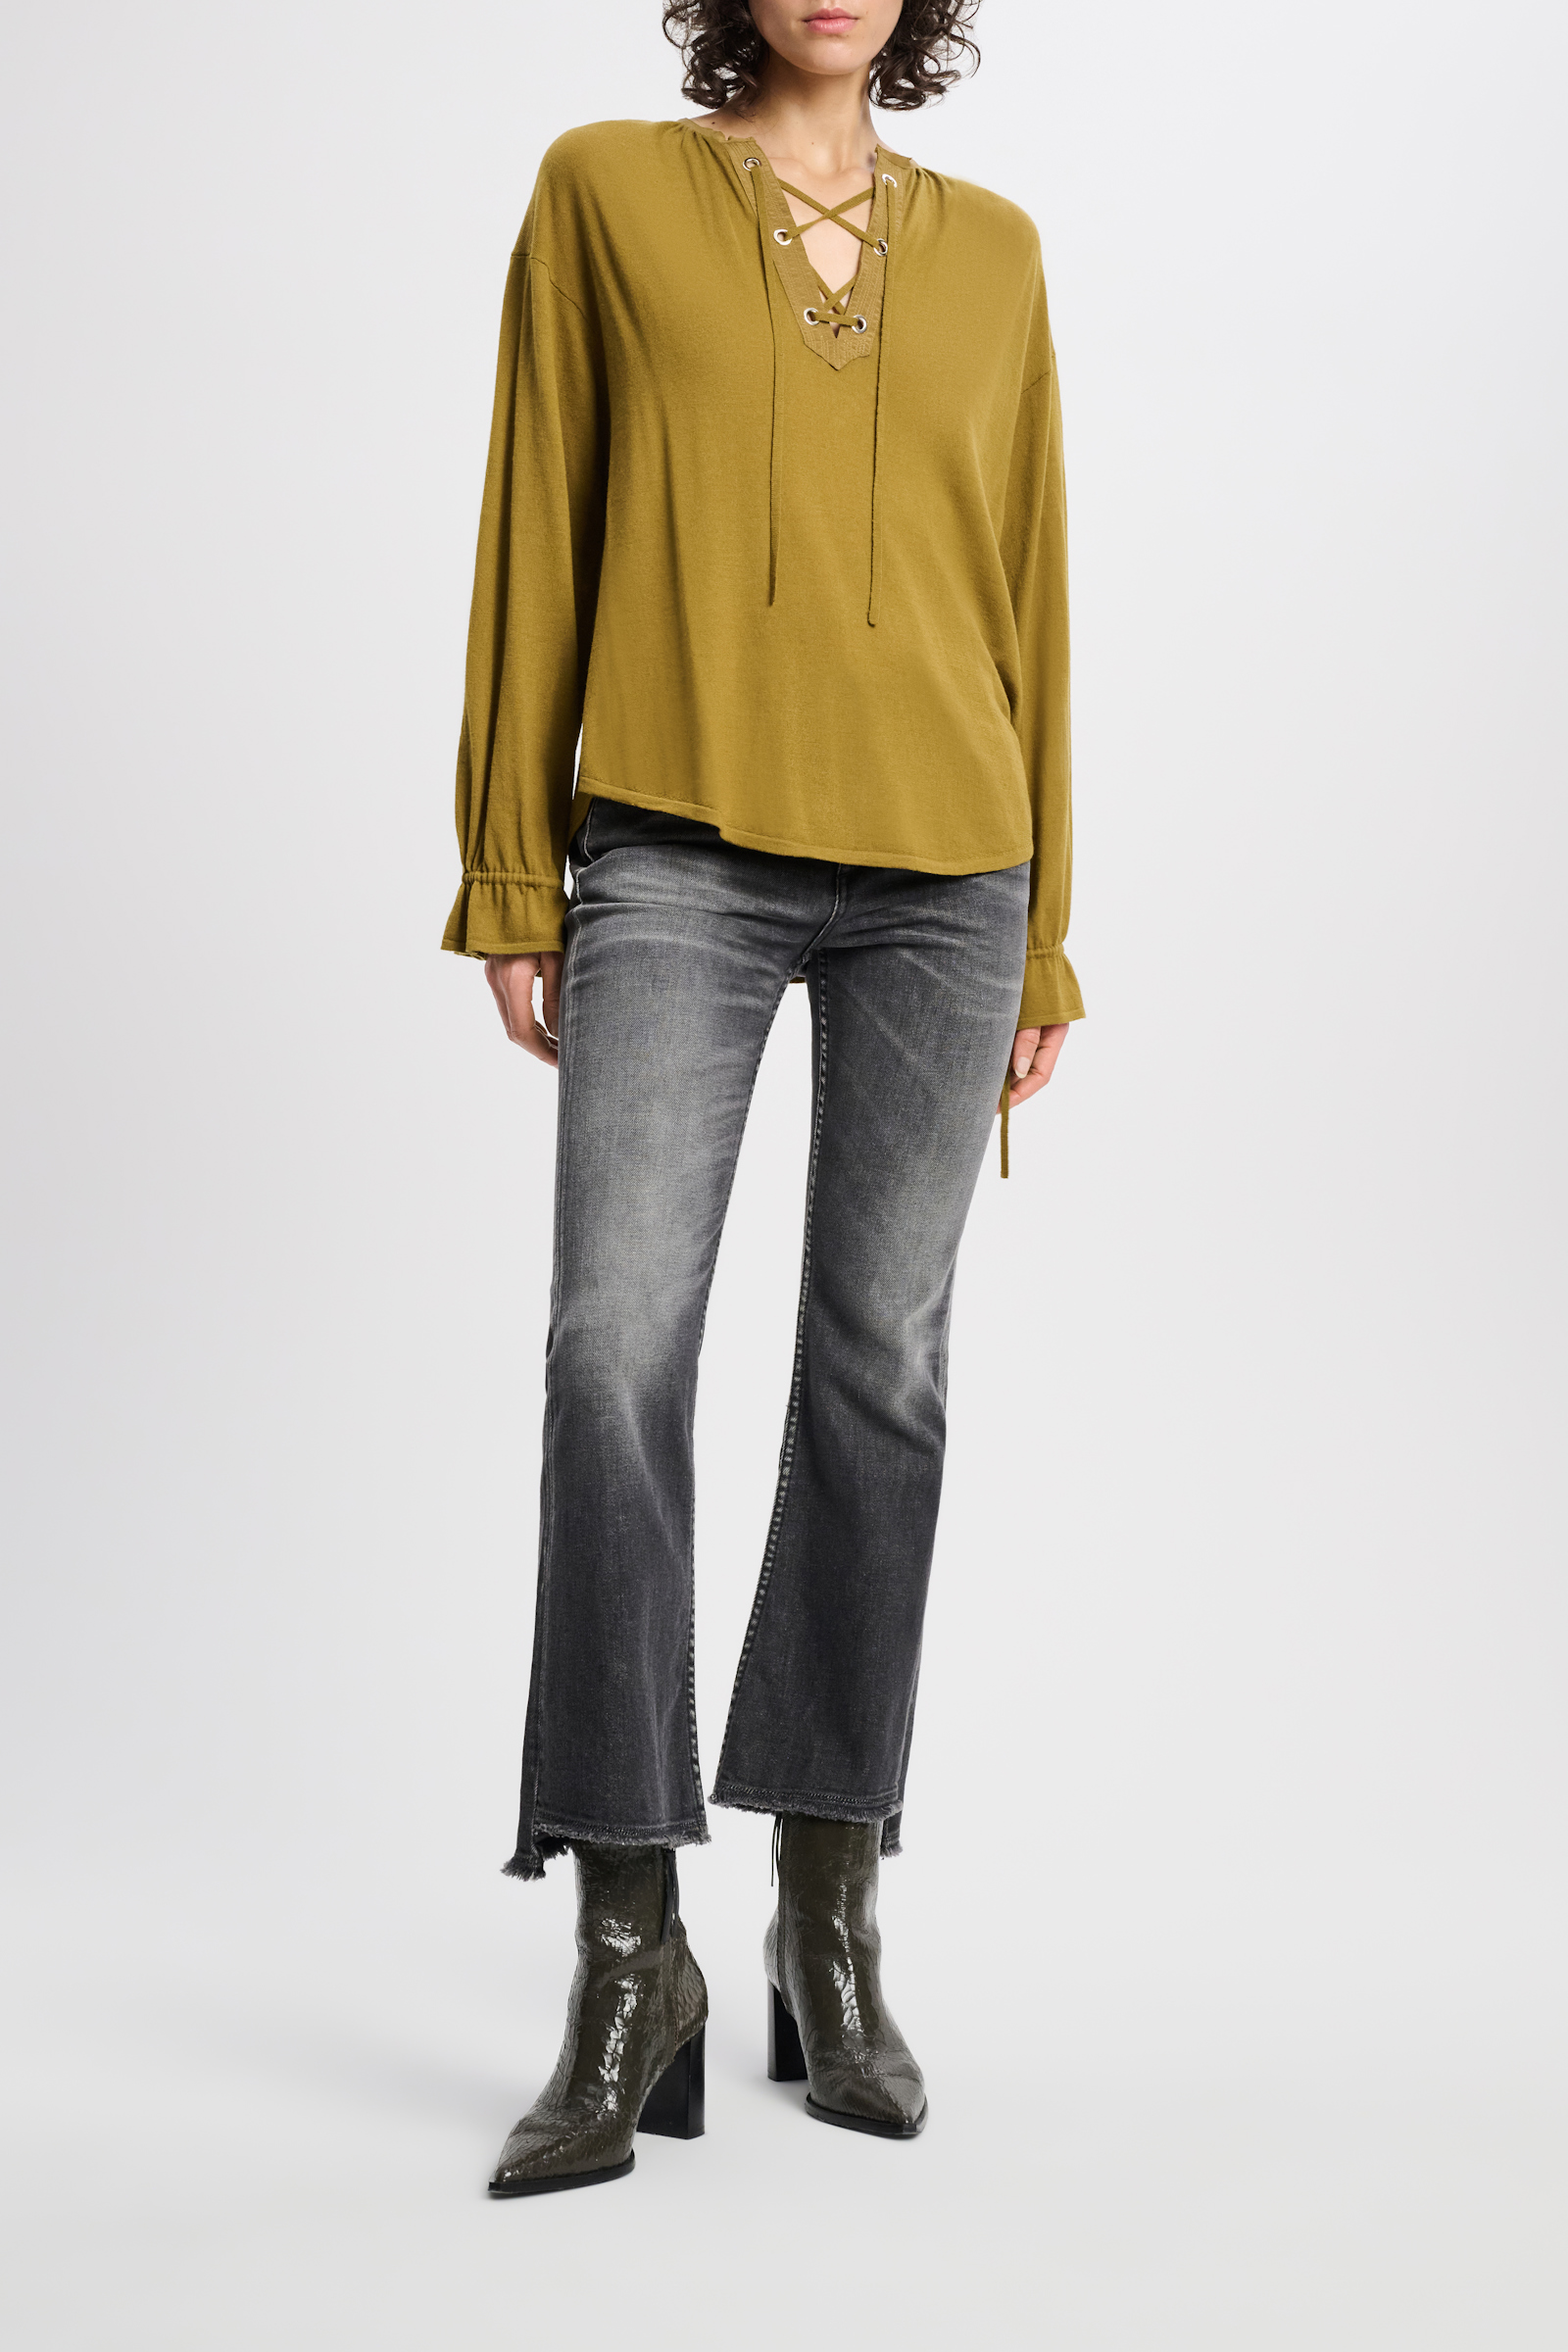 Dorothee Schumacher Laced pullover with details in silk-crêpe de chine light olive green